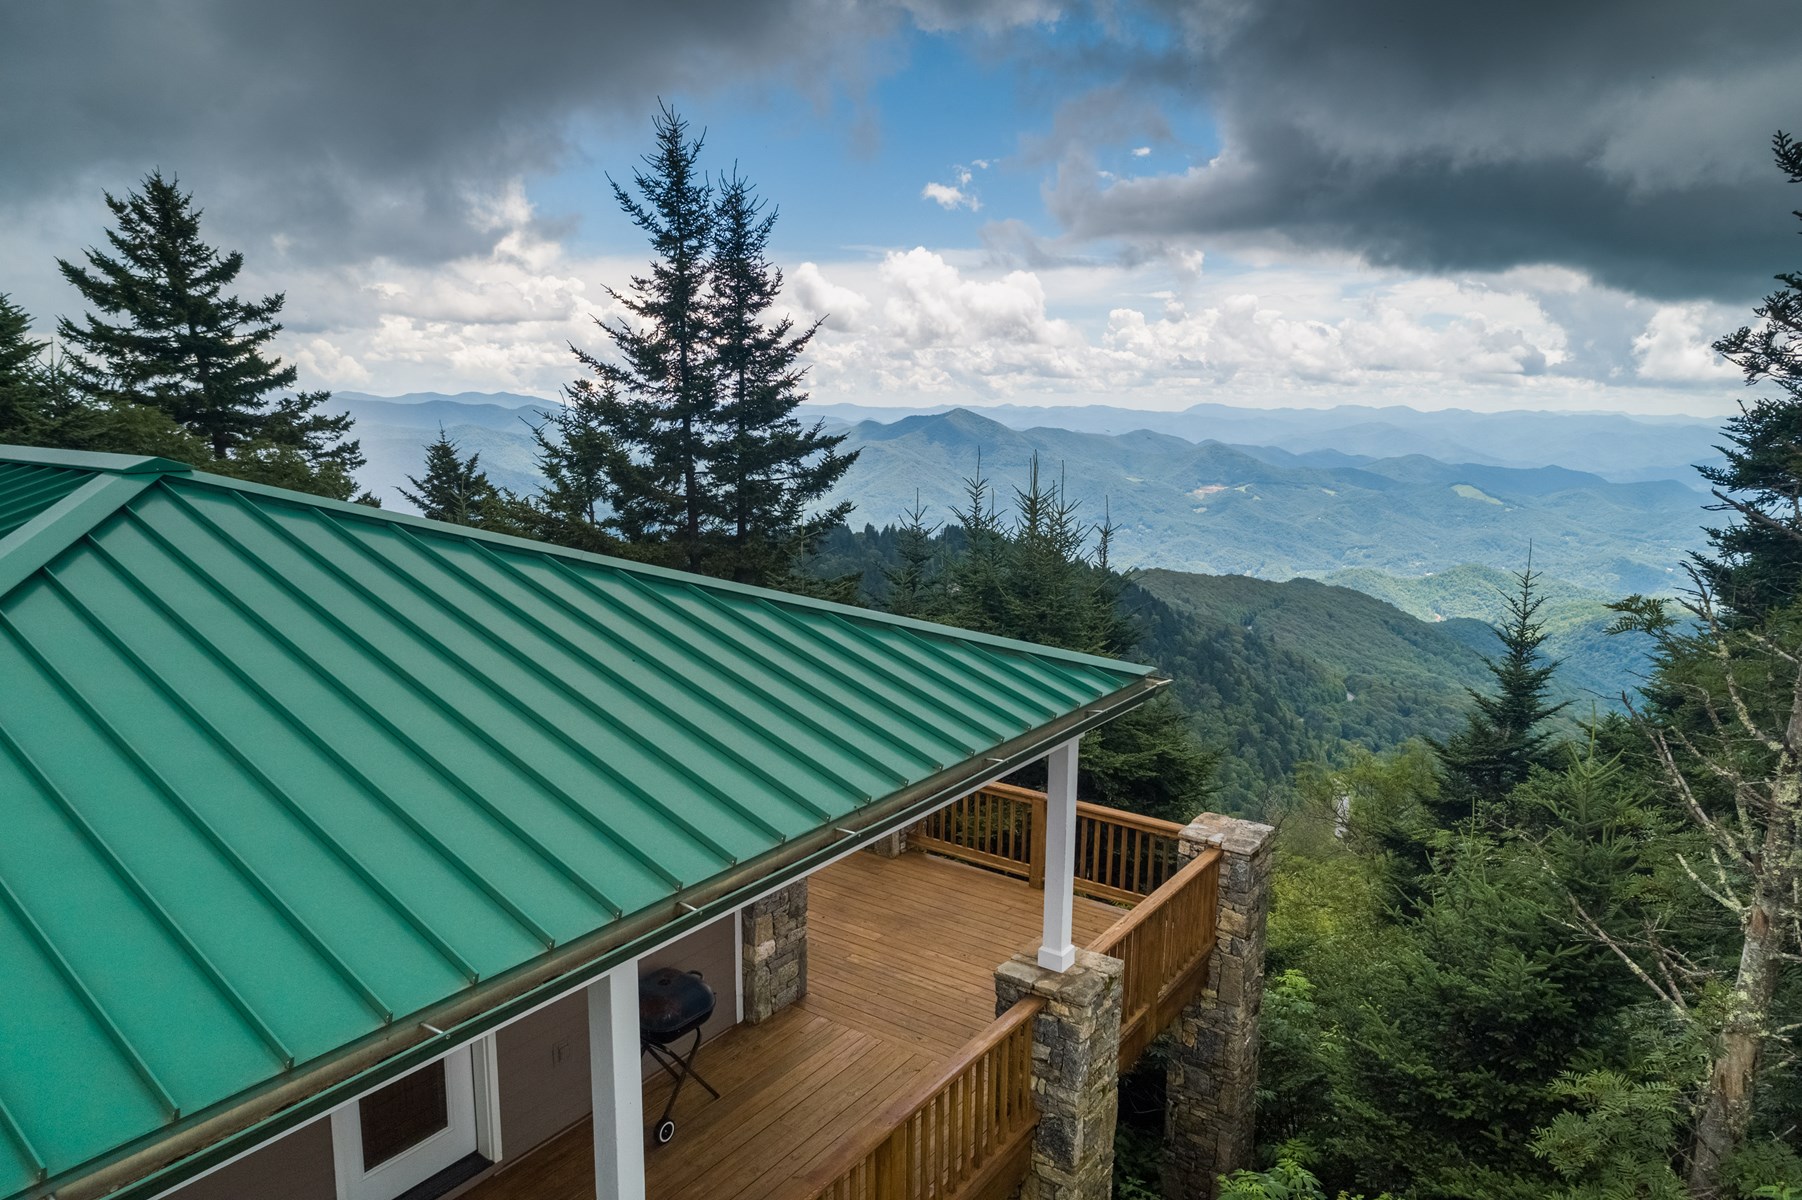 Located on Mount Lyn Lowry near the town of Balsam, the property has long-range layered mountain views of the Pisgah National Forest and Blue Ridge Mountains.